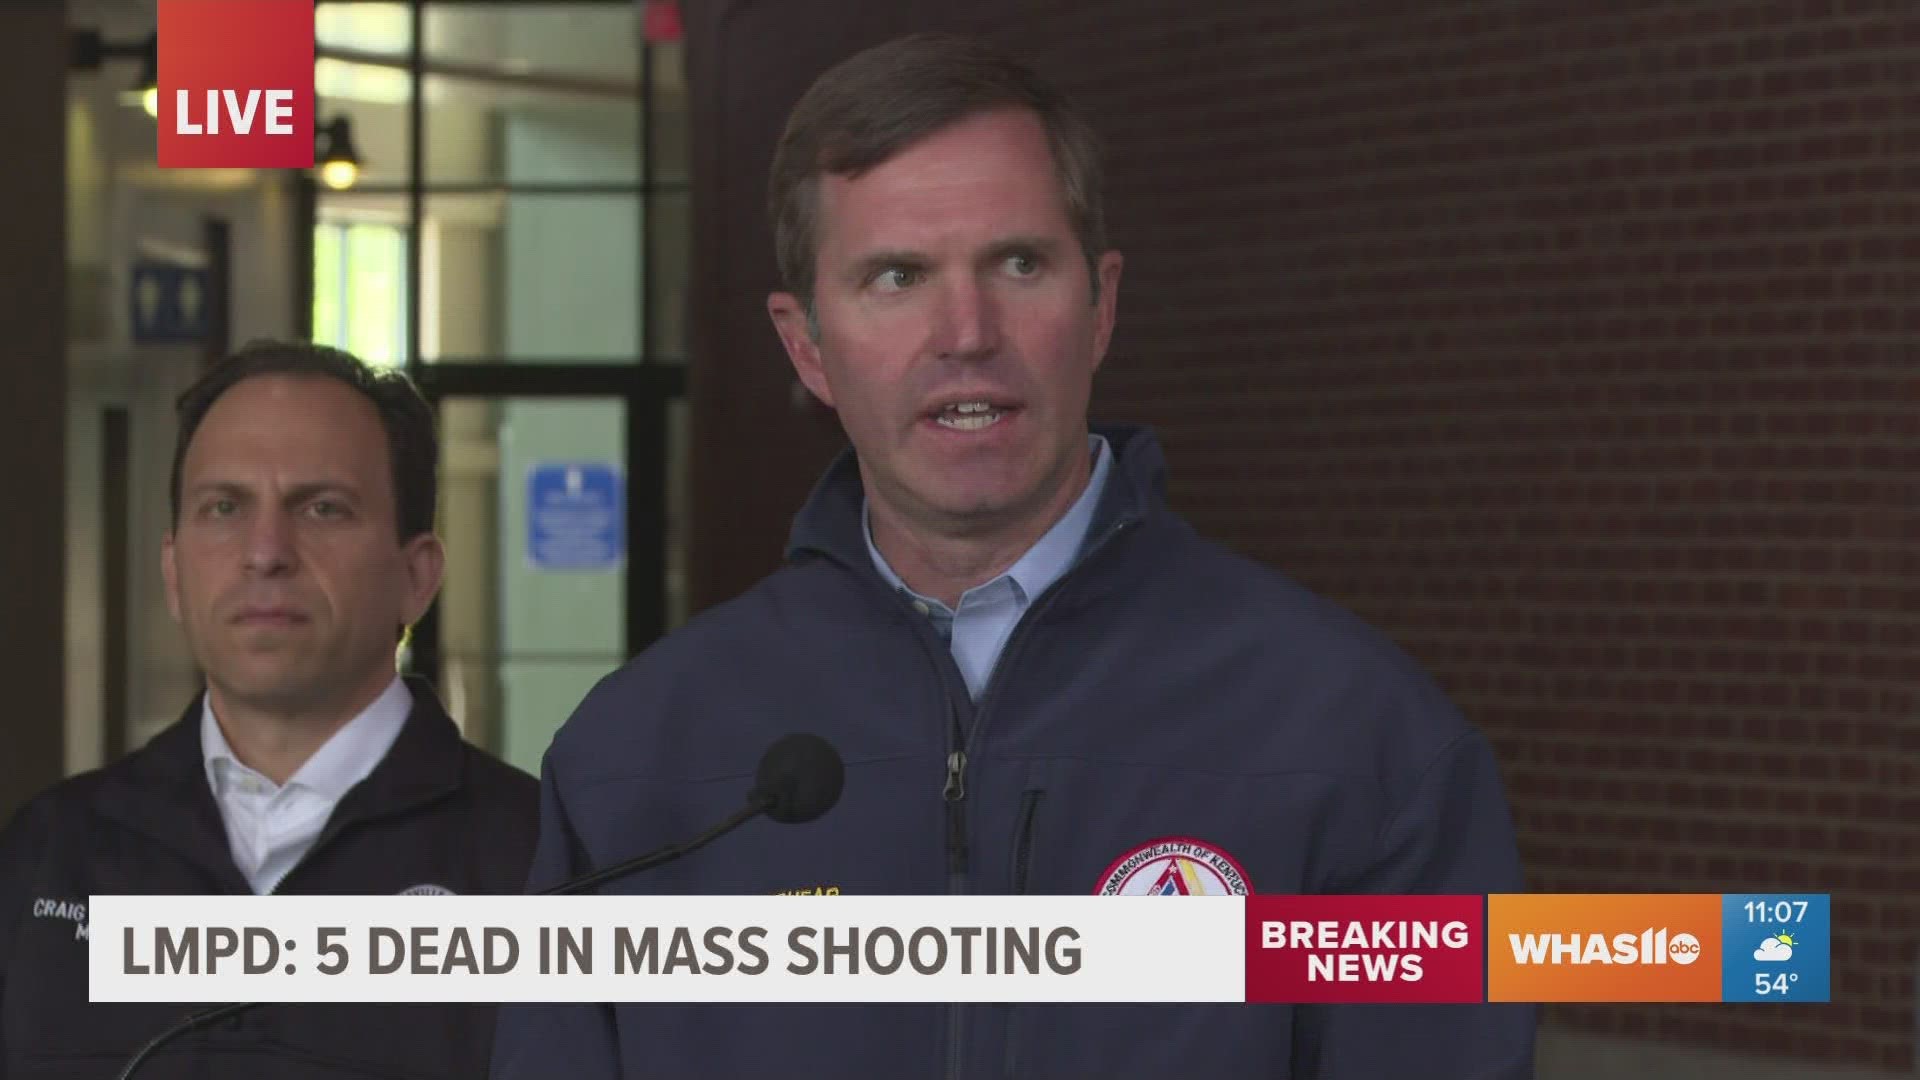 The governor got emotional while giving an update on the mass shooting at a Louisville bank.